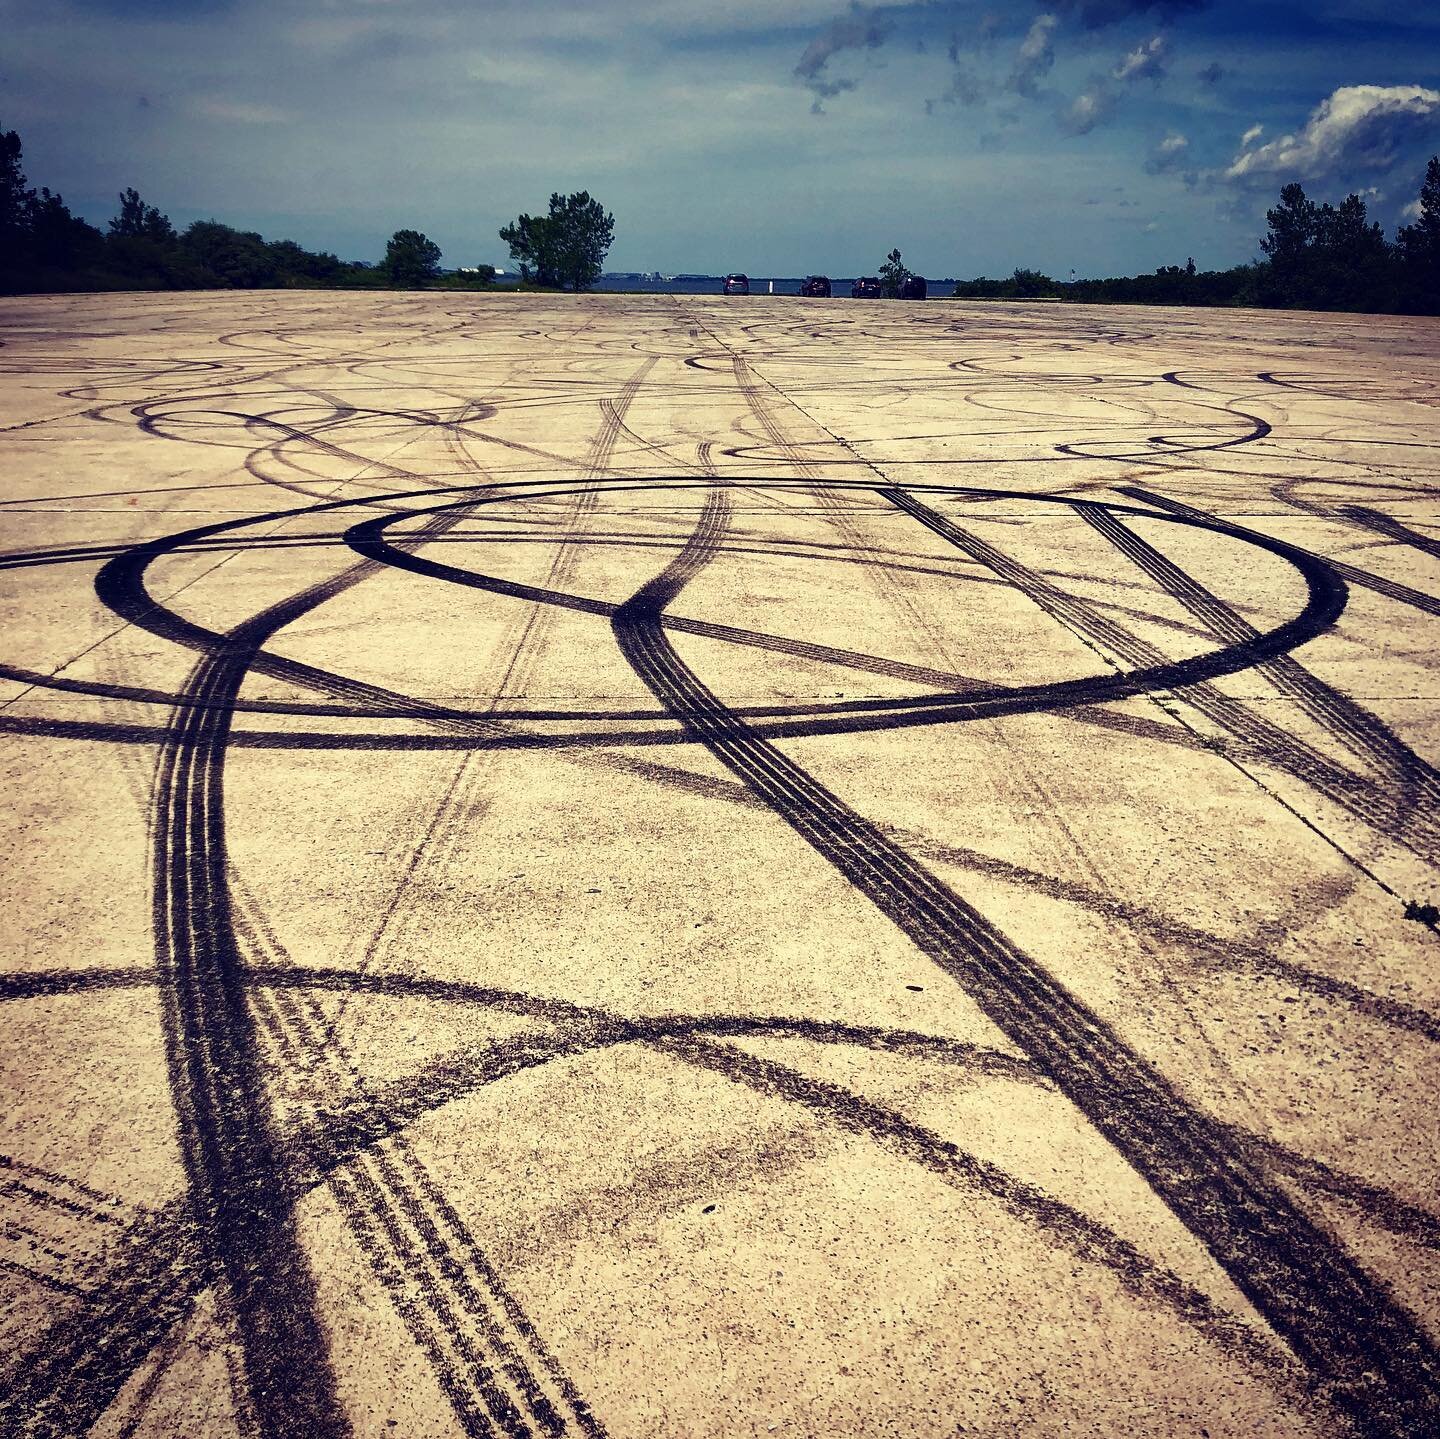 Donuts of forgotten dreams. #race #racing #racetrack #nyc #car #carculture #pavement #nyc #street #graphic #abstract #musclecar #monstercar #nyc #brooklyn #donuts